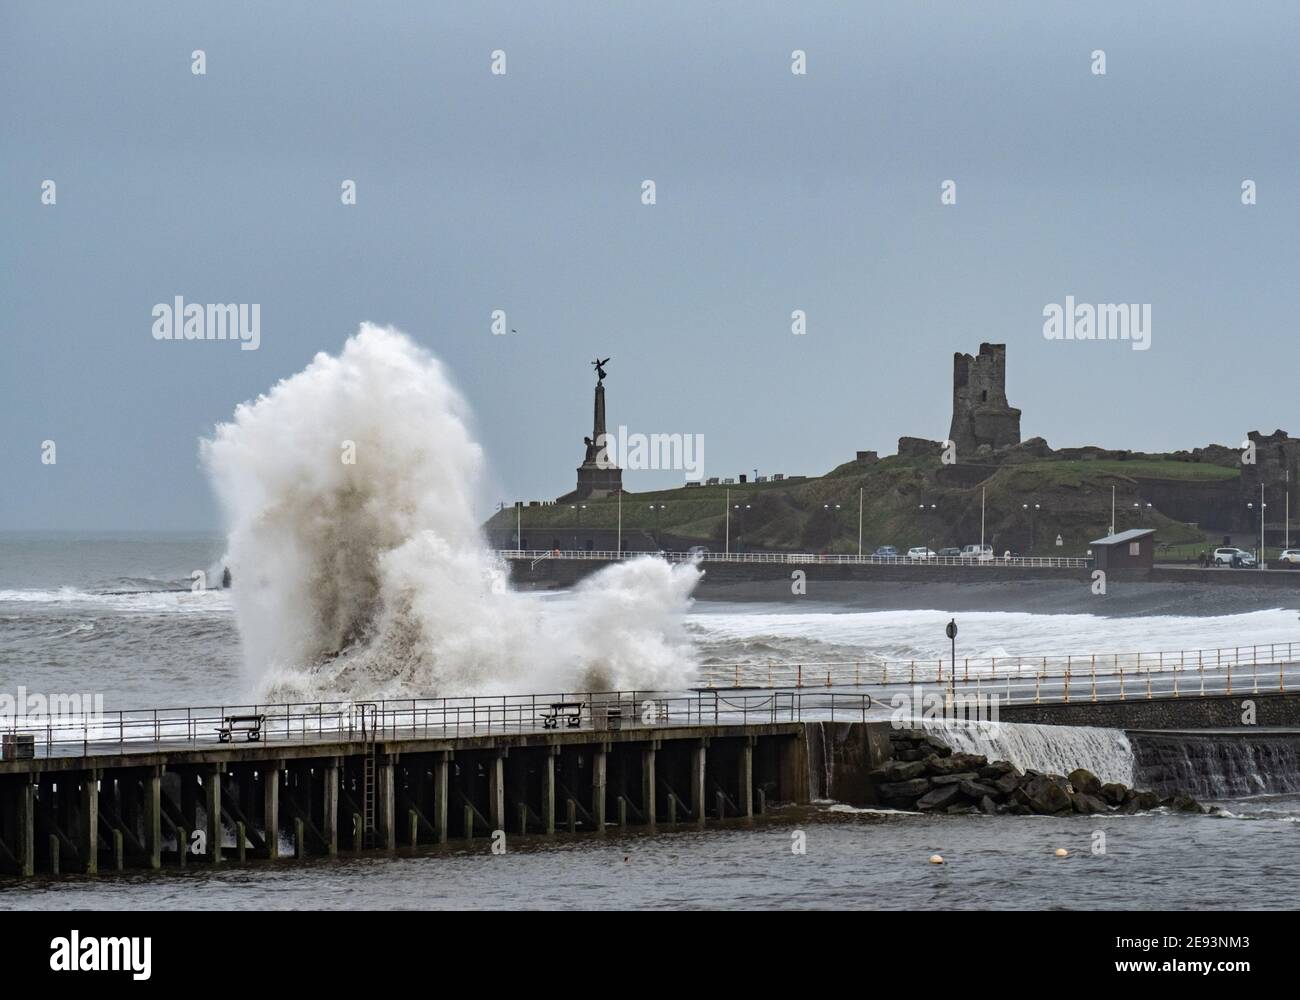 Gale force winds gusting at over 60mph and the morning’s high tide combine, bringing huge waves sweeping across the Irish Sea to batter the sea defences at Aberystwyth on the Cardigan Bay coast, West Wales UK Stock Photo